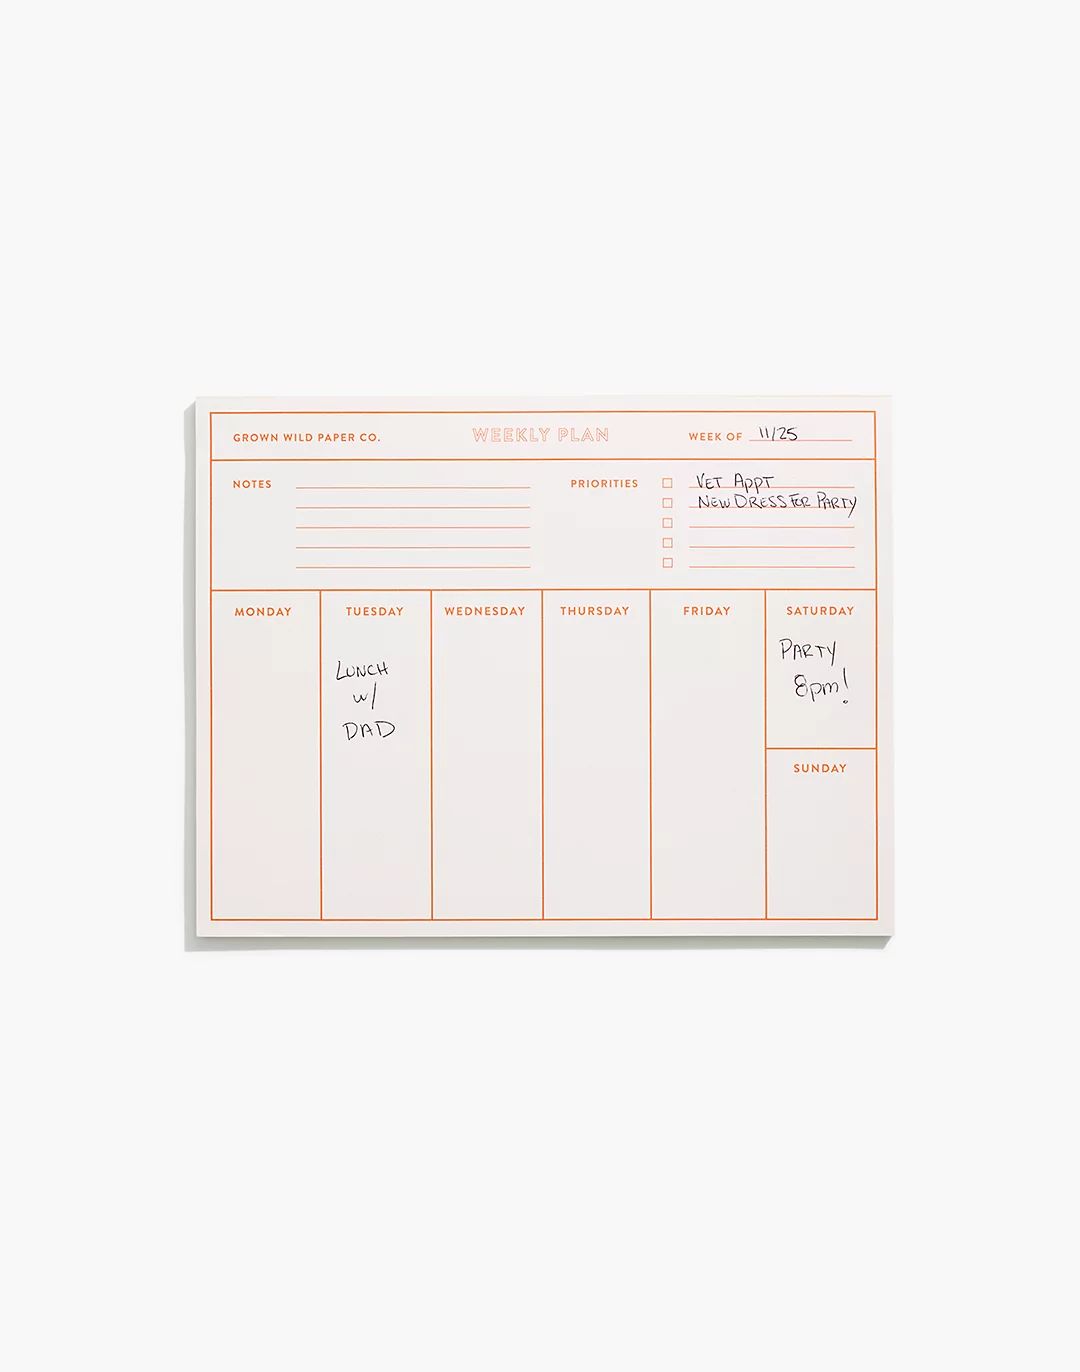 Grown Wild Paper Co. Weekly Planner | Madewell